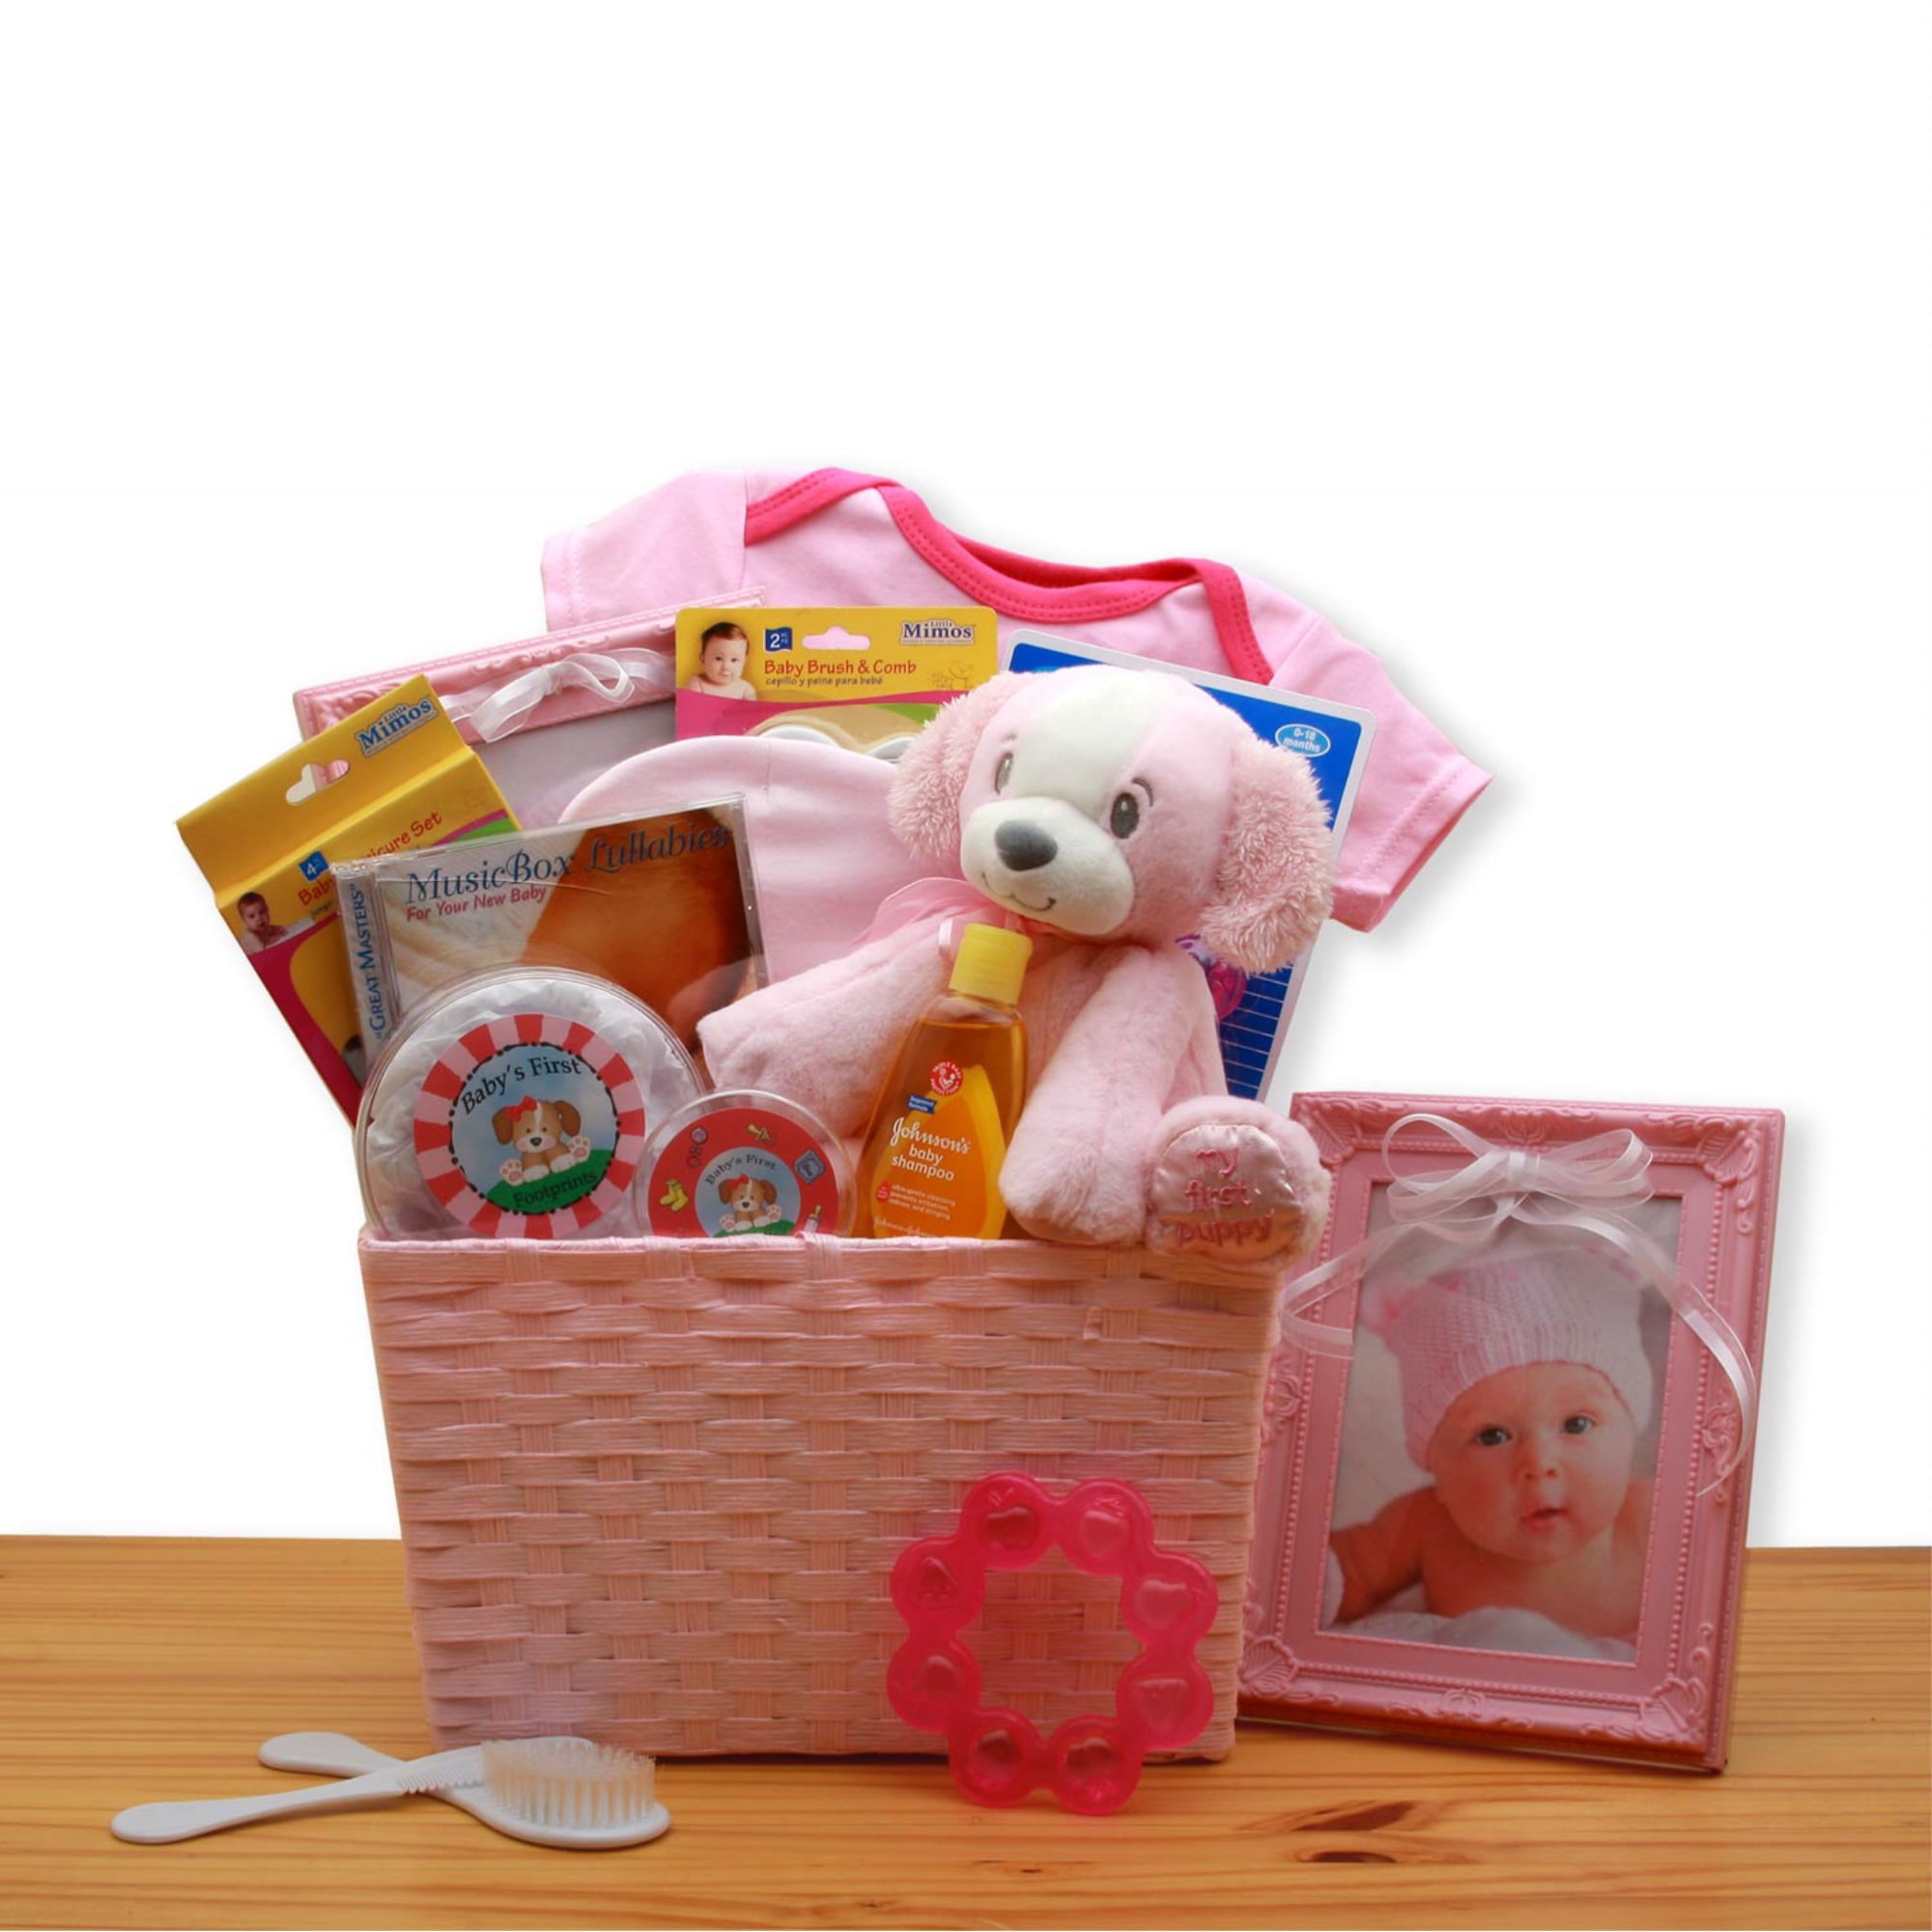 New Baby Gift Basket For Proud New Parents Congratulations on Your New Arrival! 